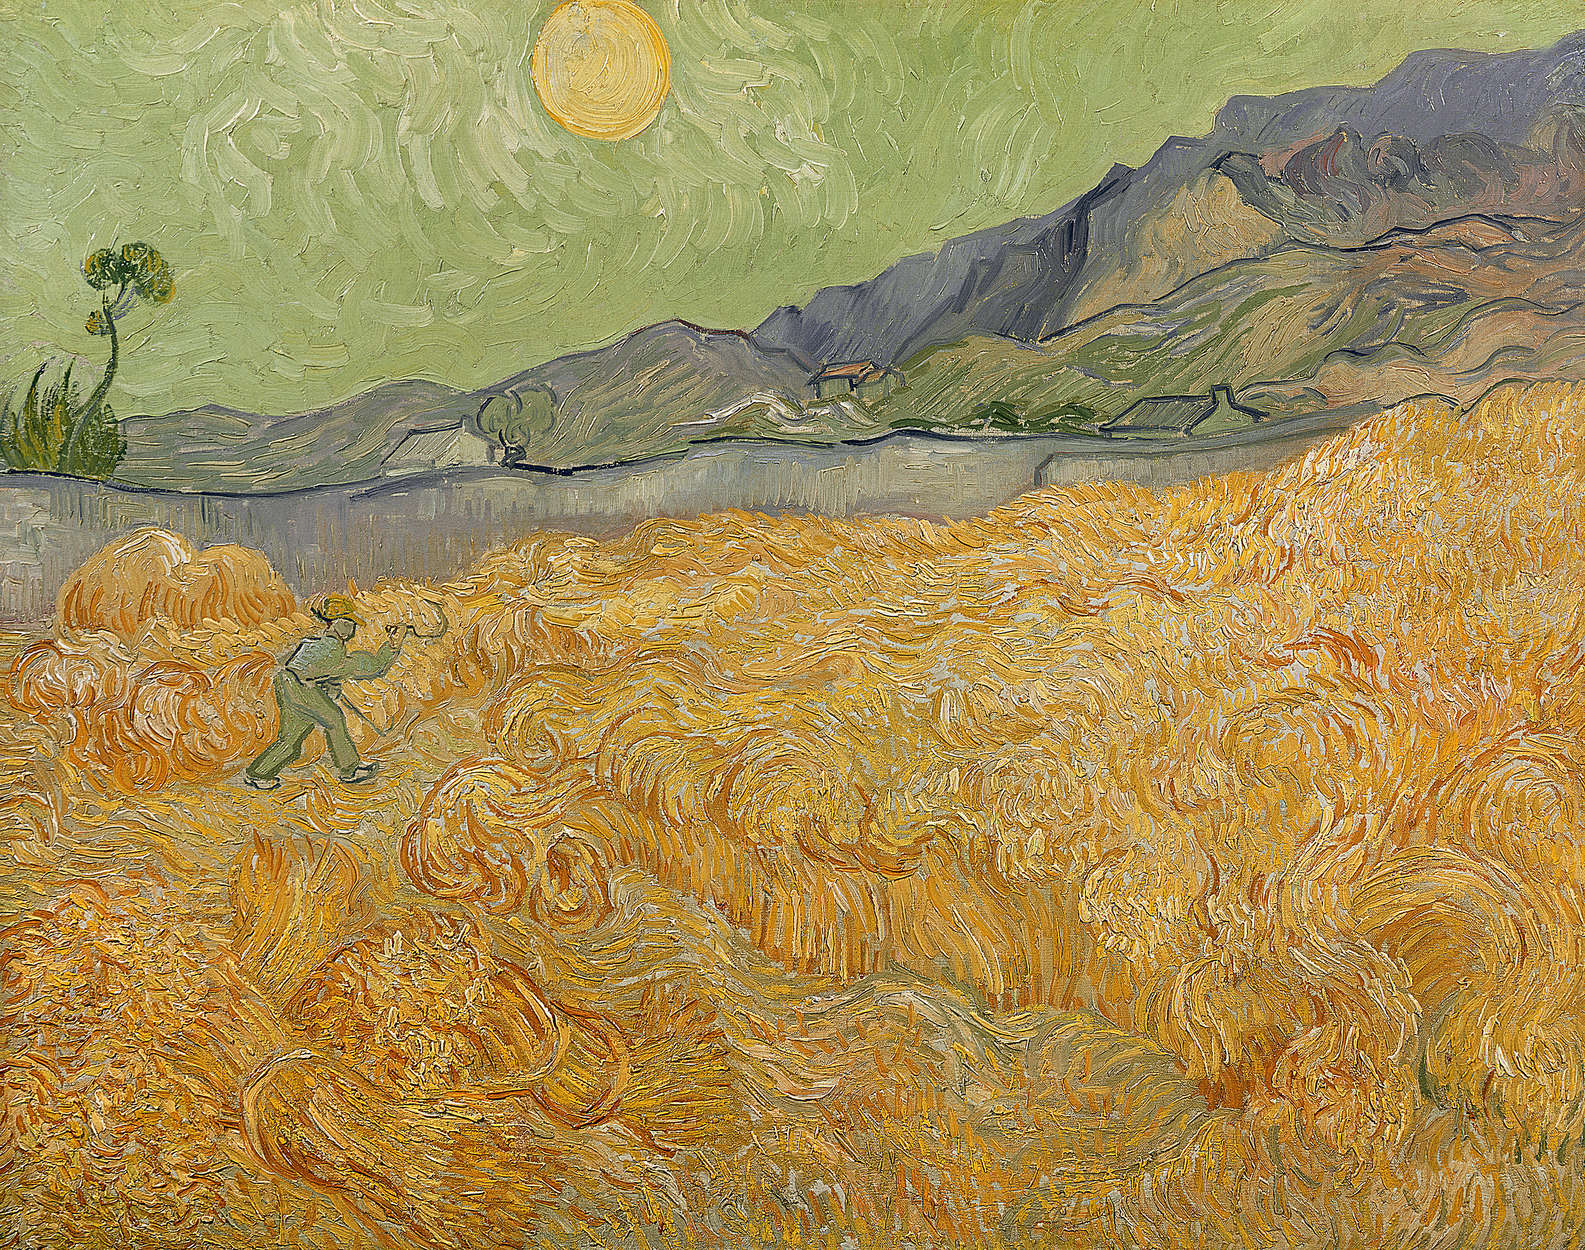             Photo wallpaper "Wheat field with reaper" by Vincent van Gogh
        